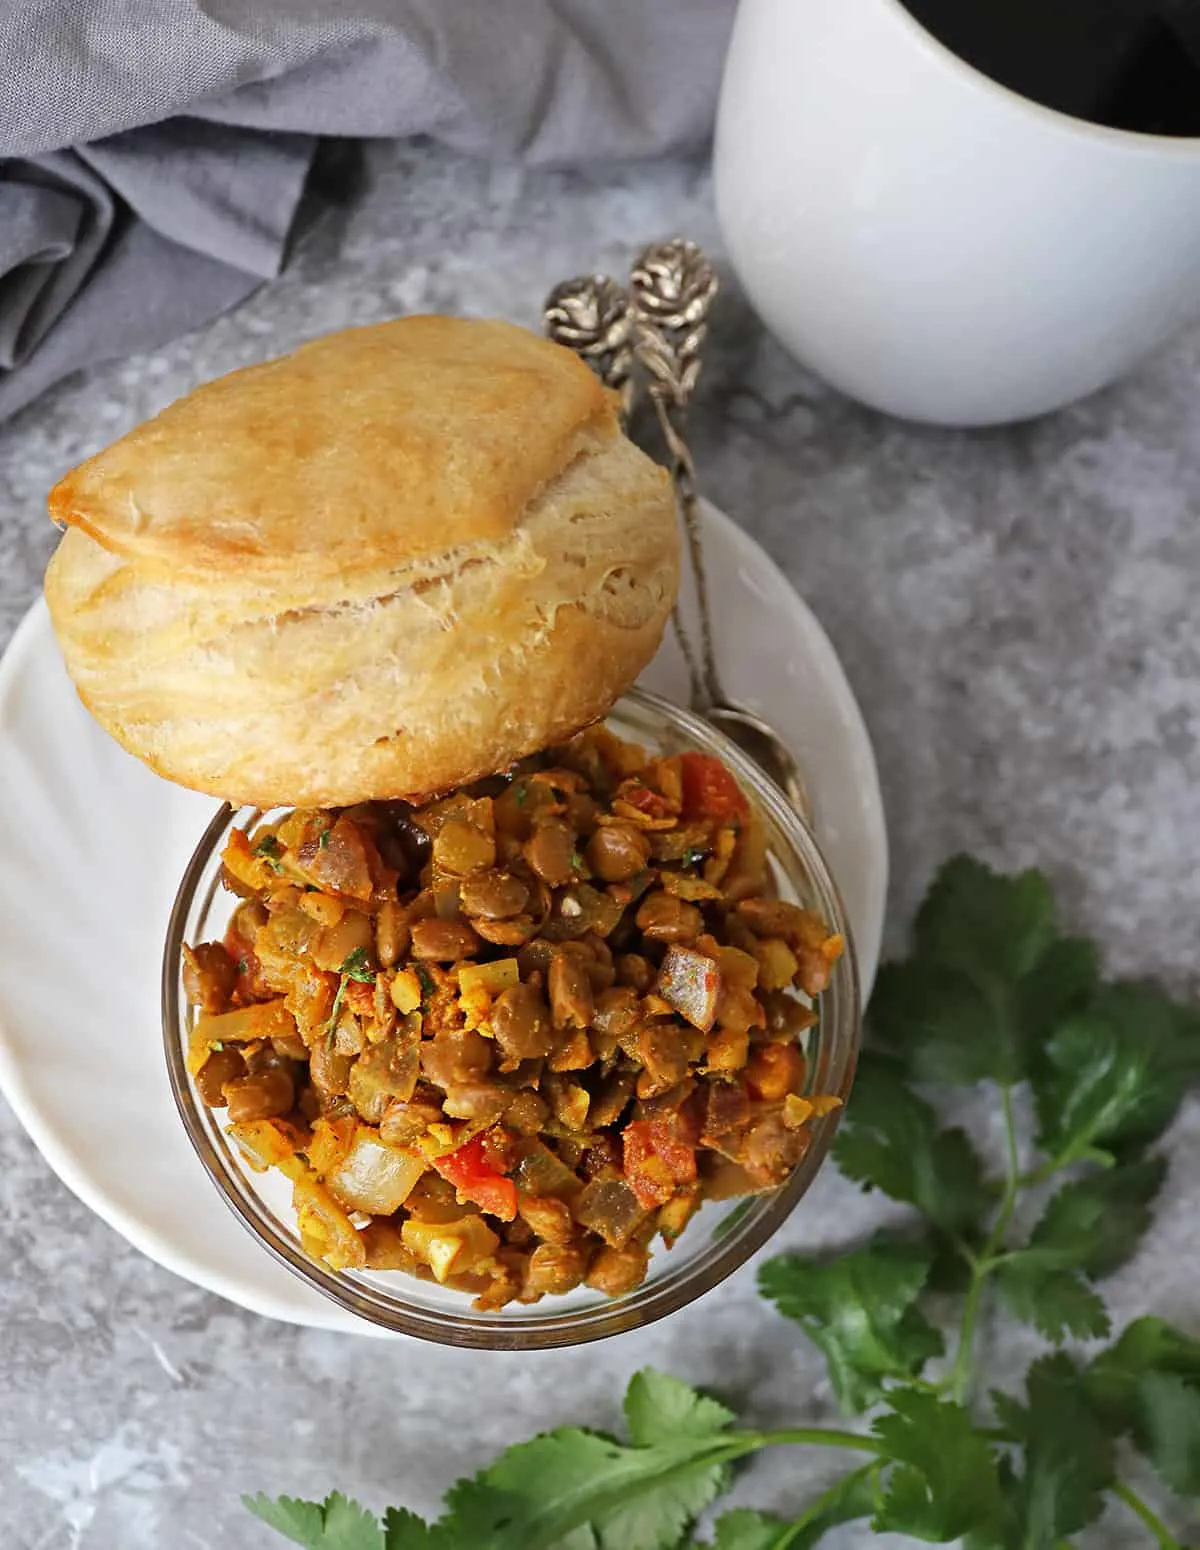 Biscuits With Lentil tomato saute